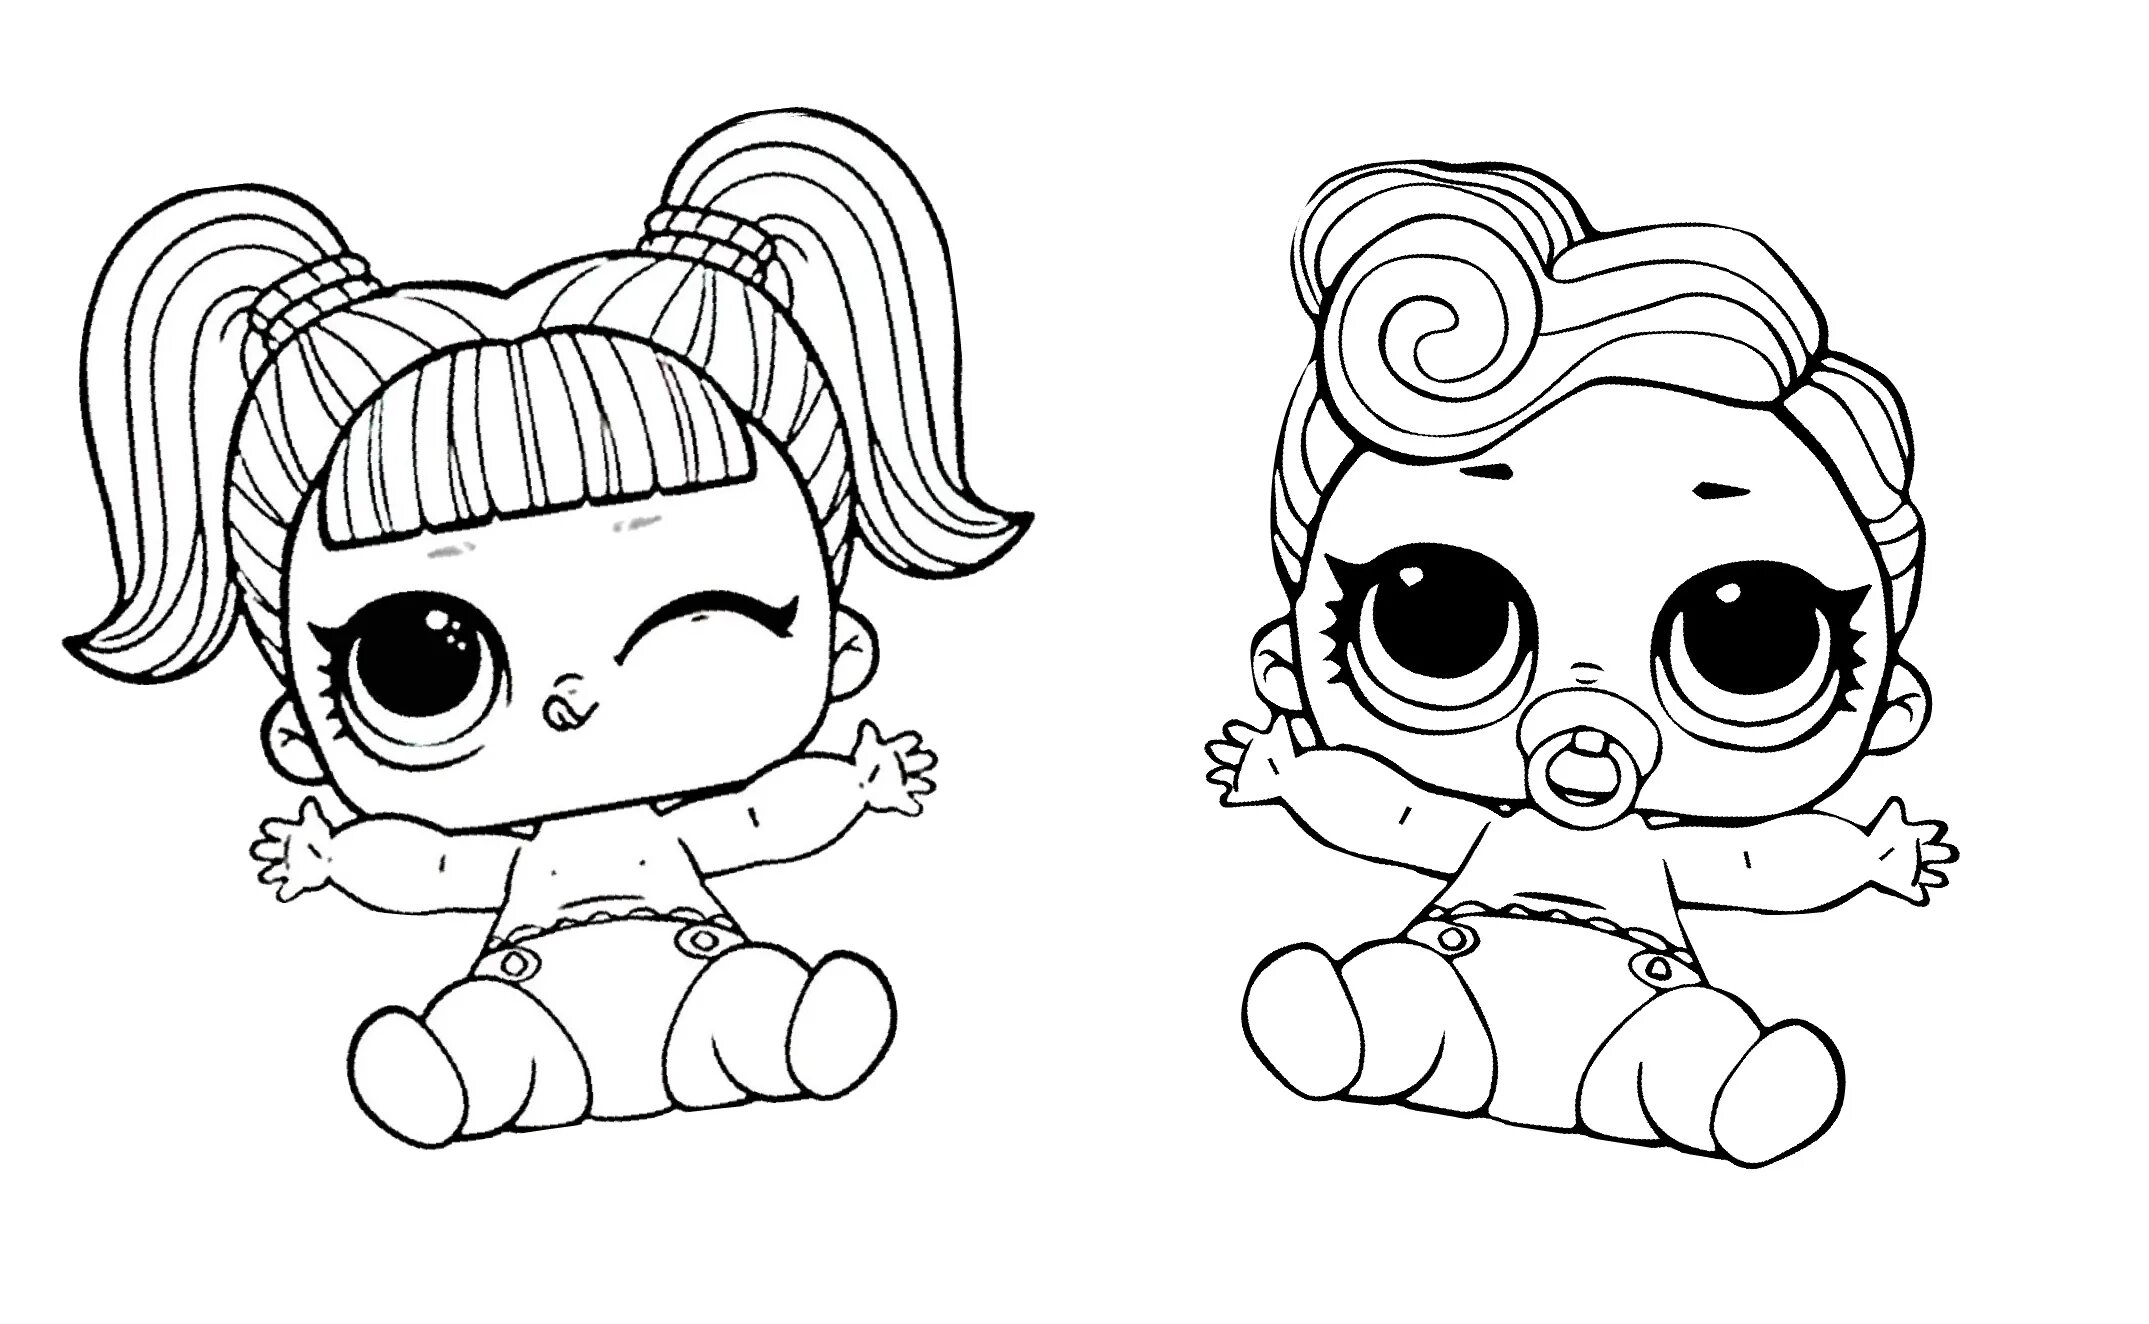 Charming coloring lol twins